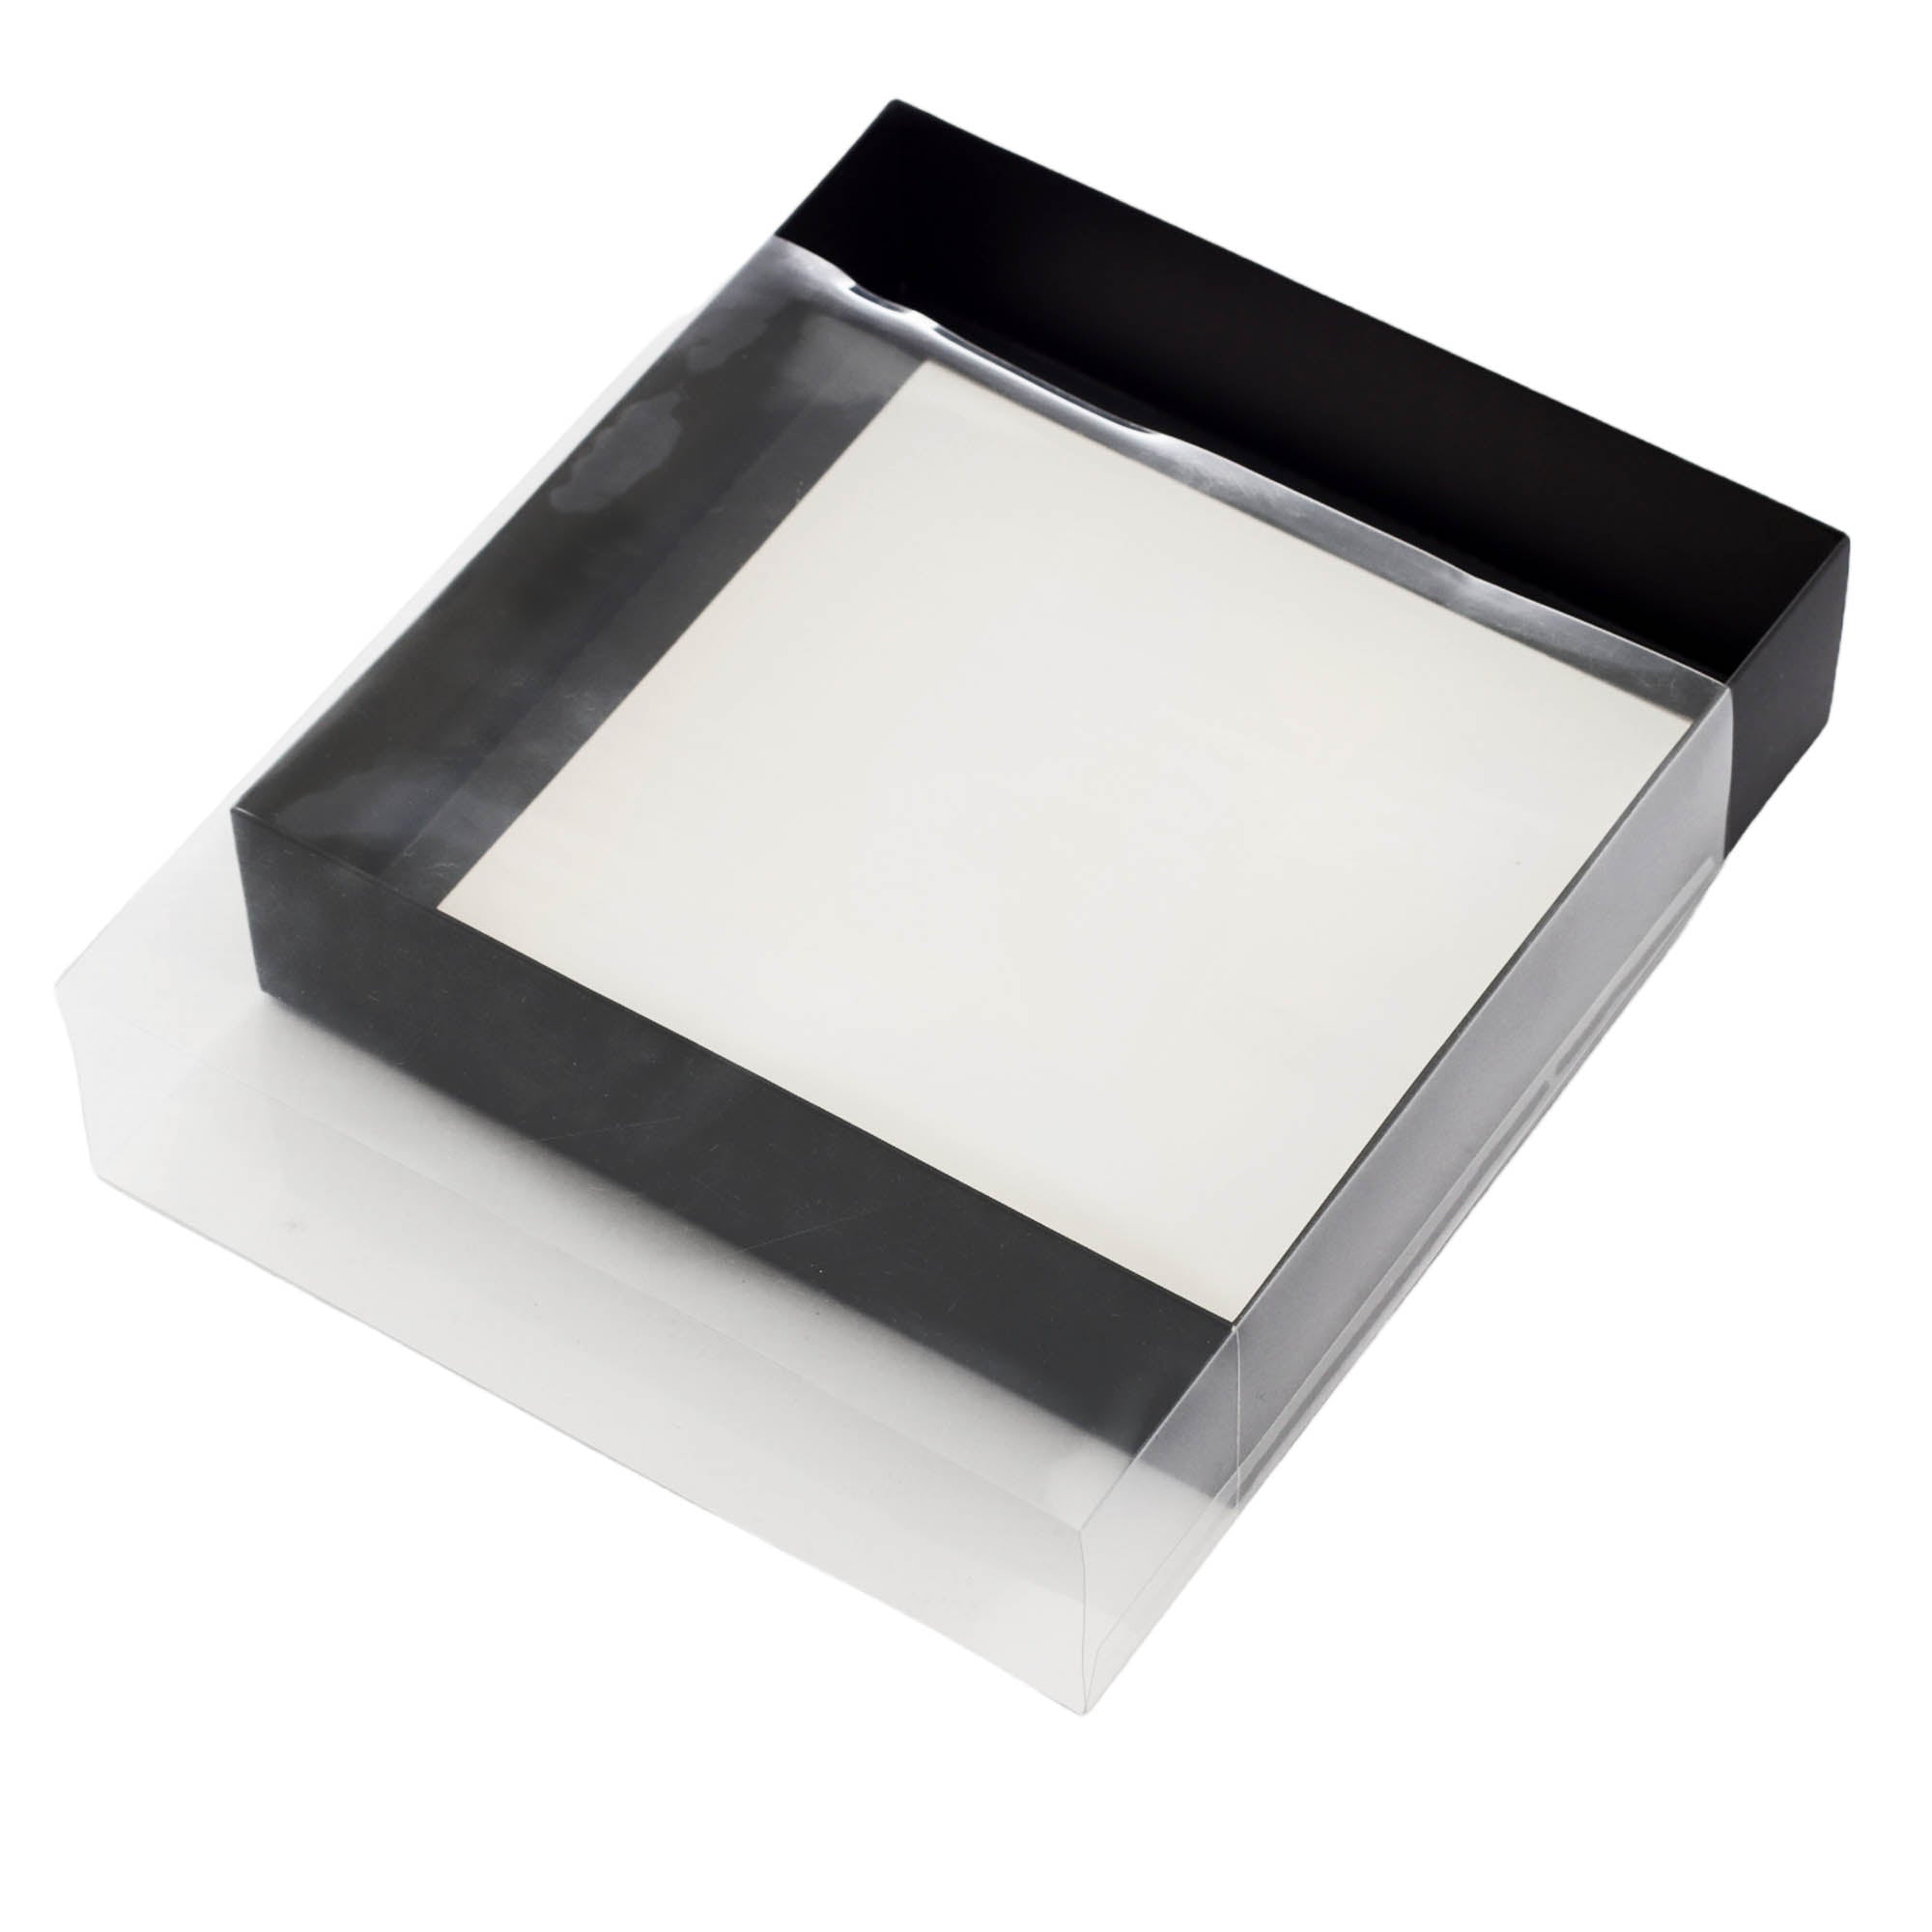 Gift Biscuit Paper Slide Box Square 19.9x19.5x5cm XPP599